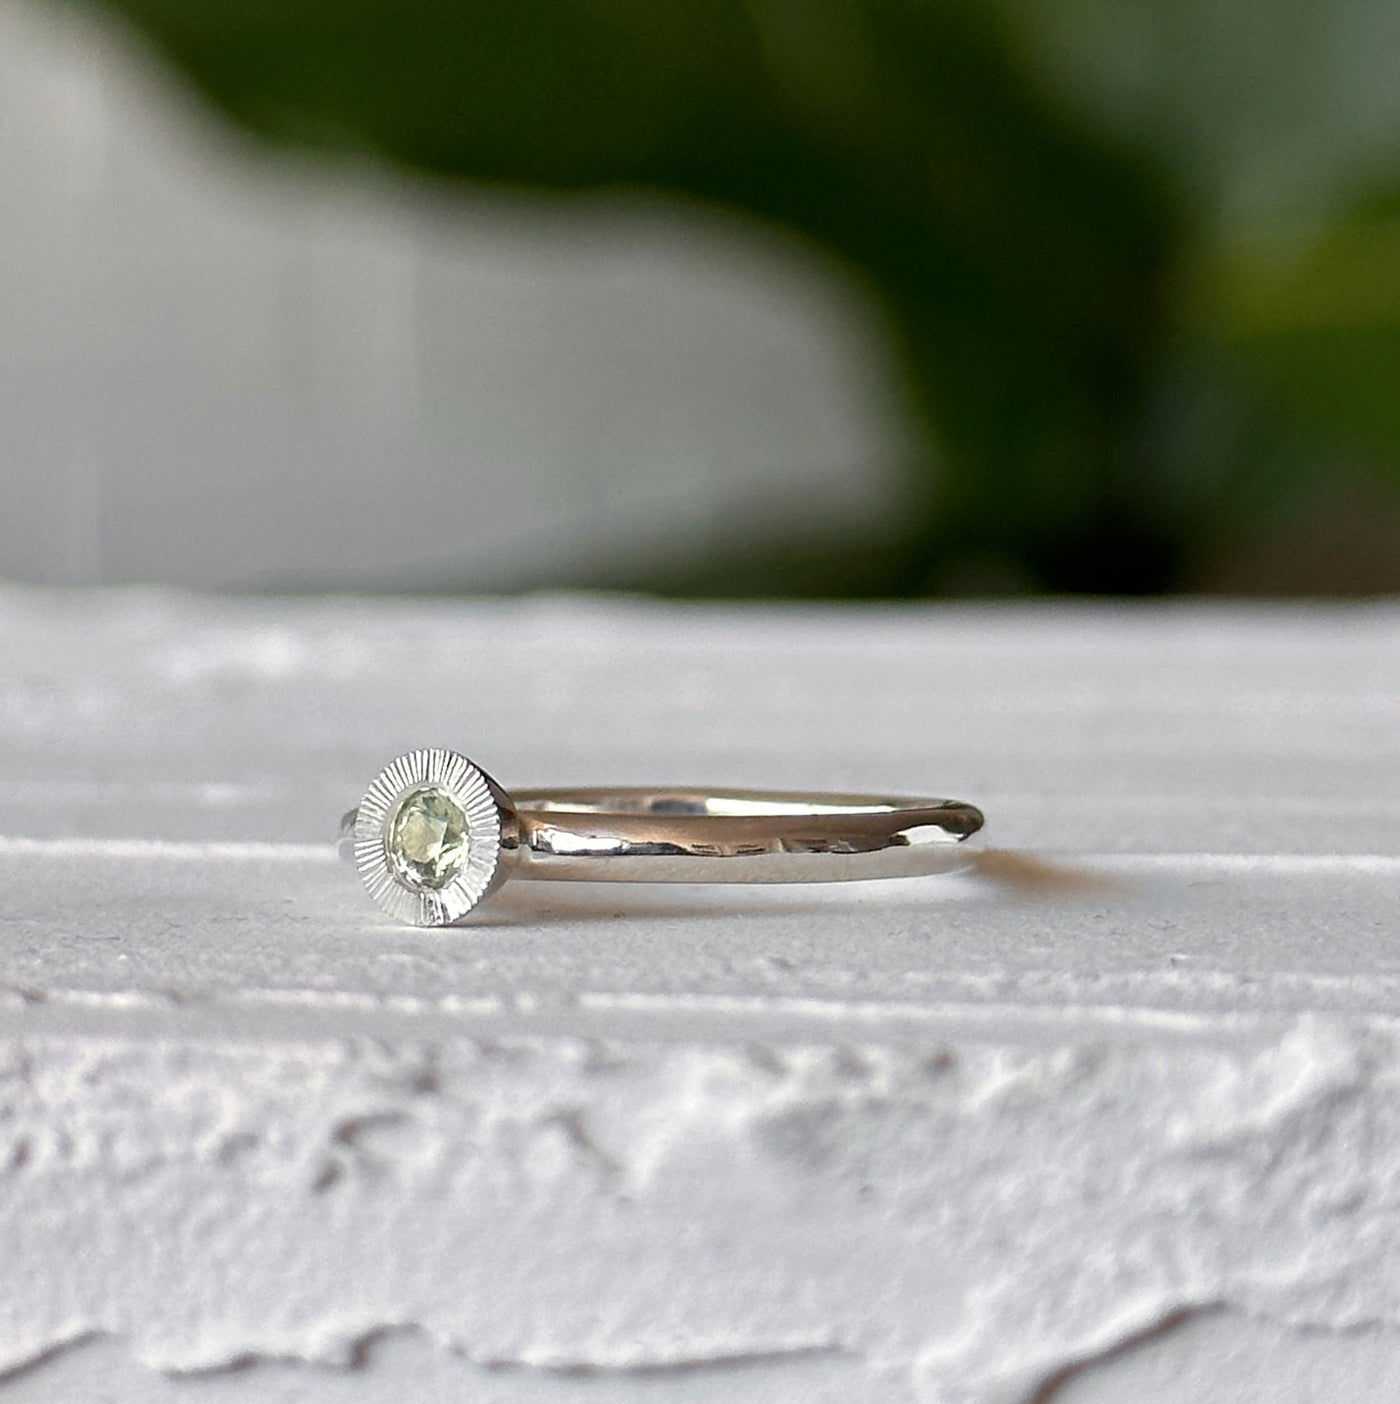 Light Green Montana Sapphire Large Aurora Stacking Ring in Silver sitting on a white table, side angle